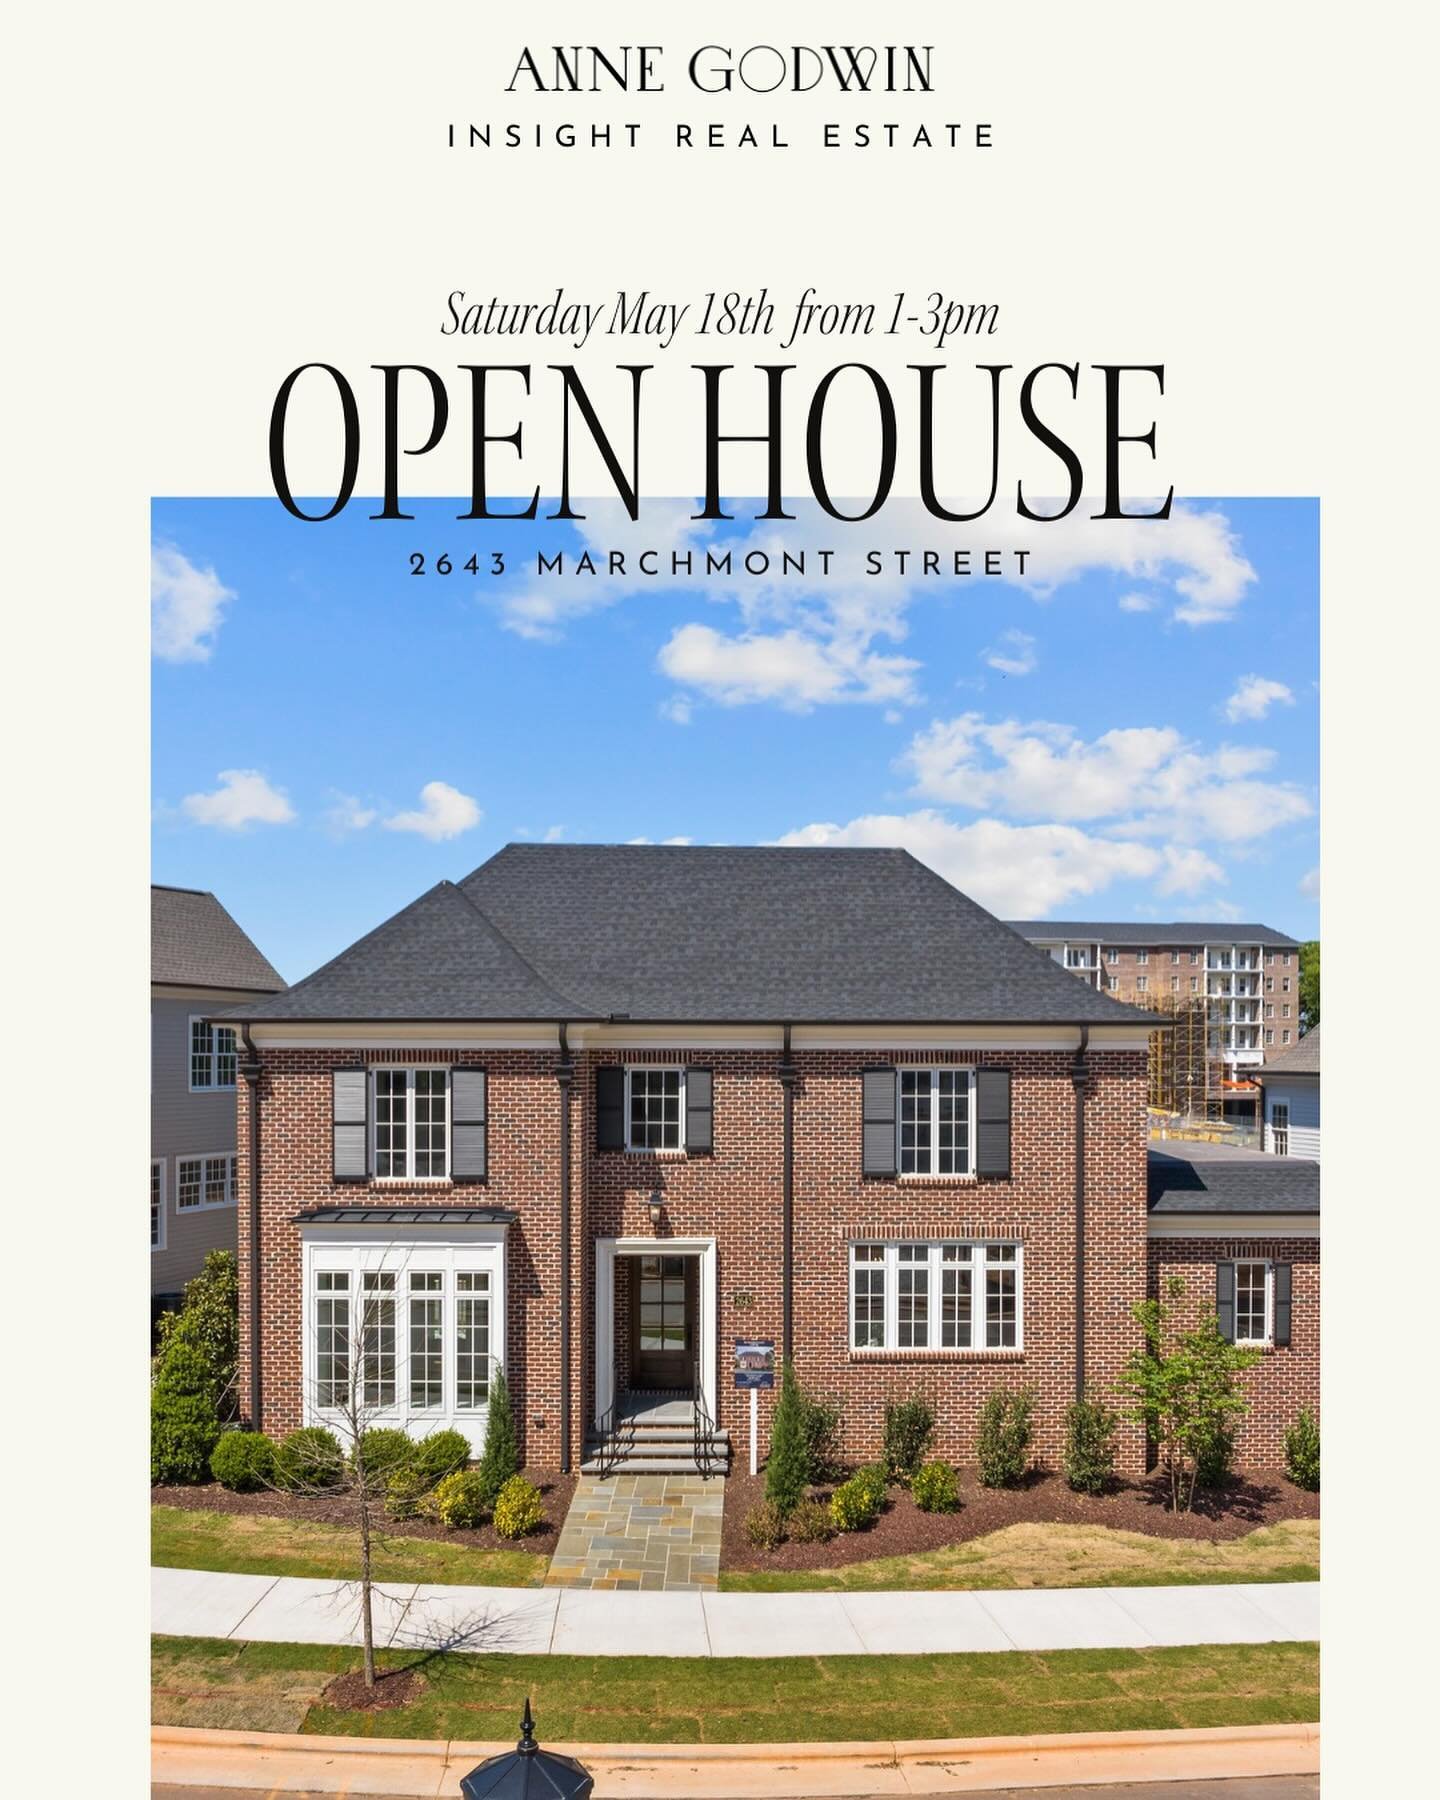 O P E N  H O U S E  tomorrow at 2643 Marchmont Street in Budleigh East from 1-3pm!

Come tour the beautiful homes by @legacycustomhomesnc and say hello to @_jordan_mckenzi @briedimino with the @caulgroup 🏡

Listed by @insightraleigh @emcrealtor @ann